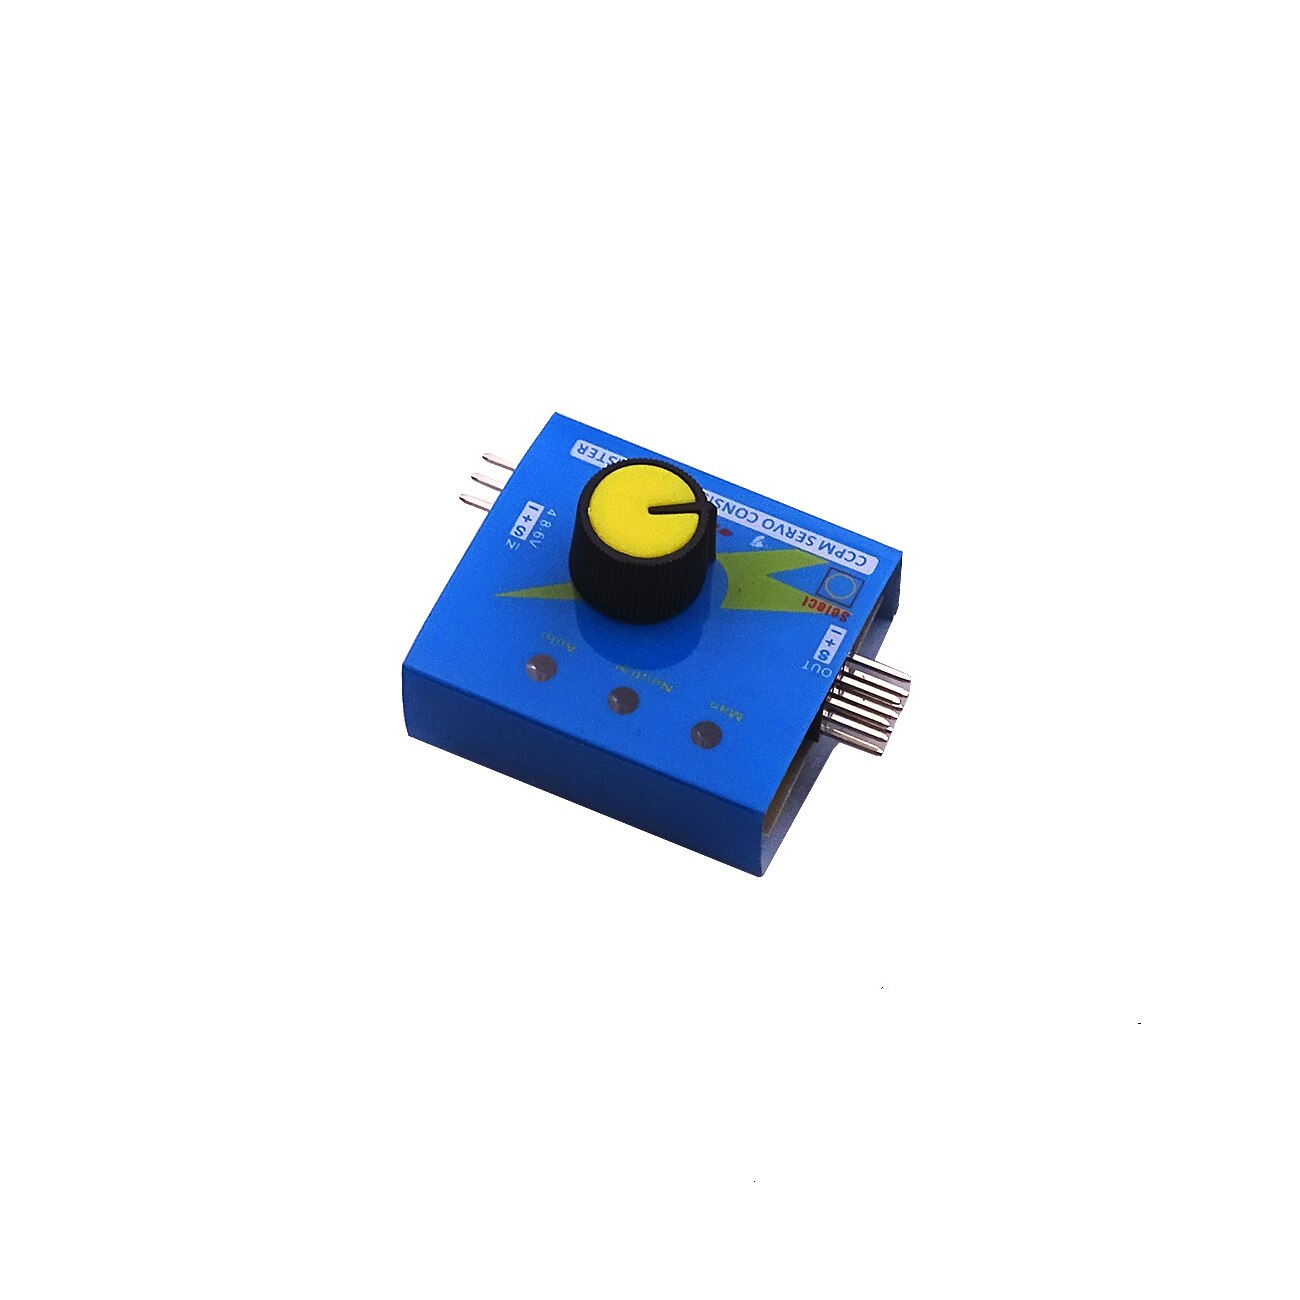 DC 12V 30A High-Power Brushless Motor Speed Controller DC 3-phase Regulator PWM Brushless Motor Speed Controller Drive: steering engine